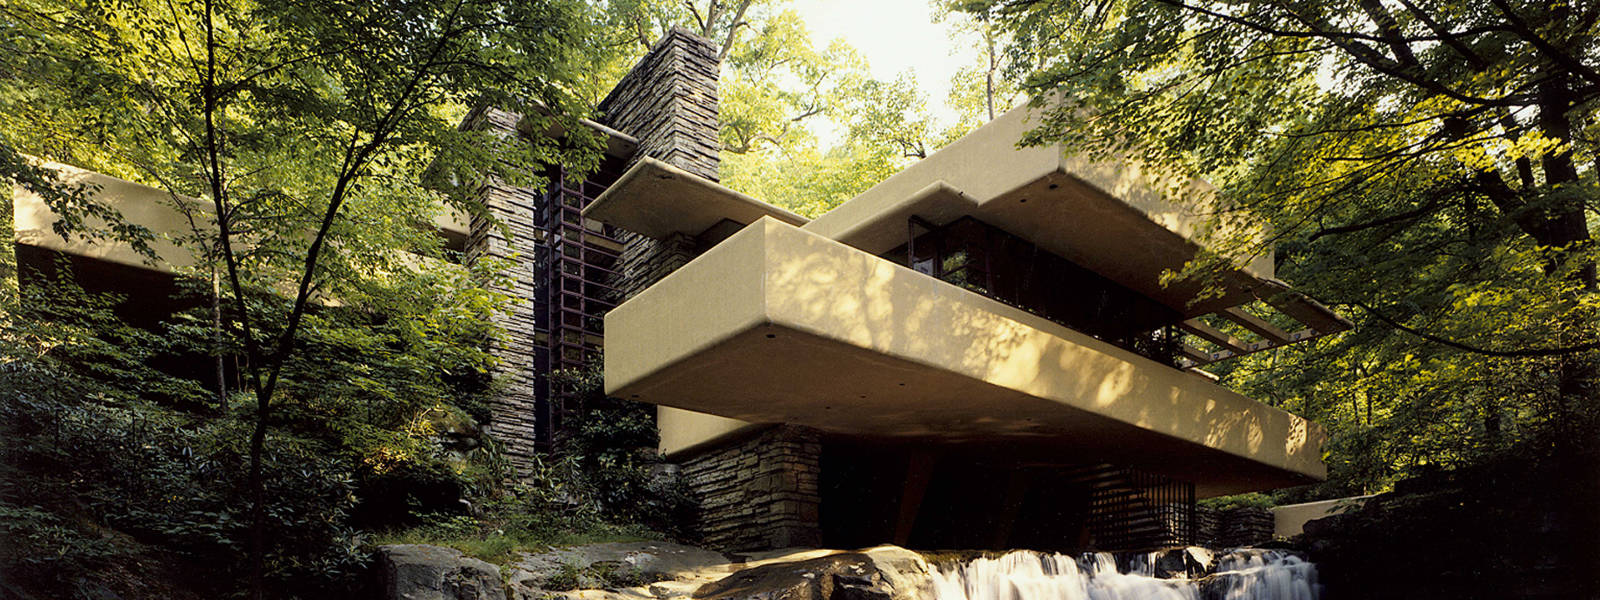 Events at Fallingwater